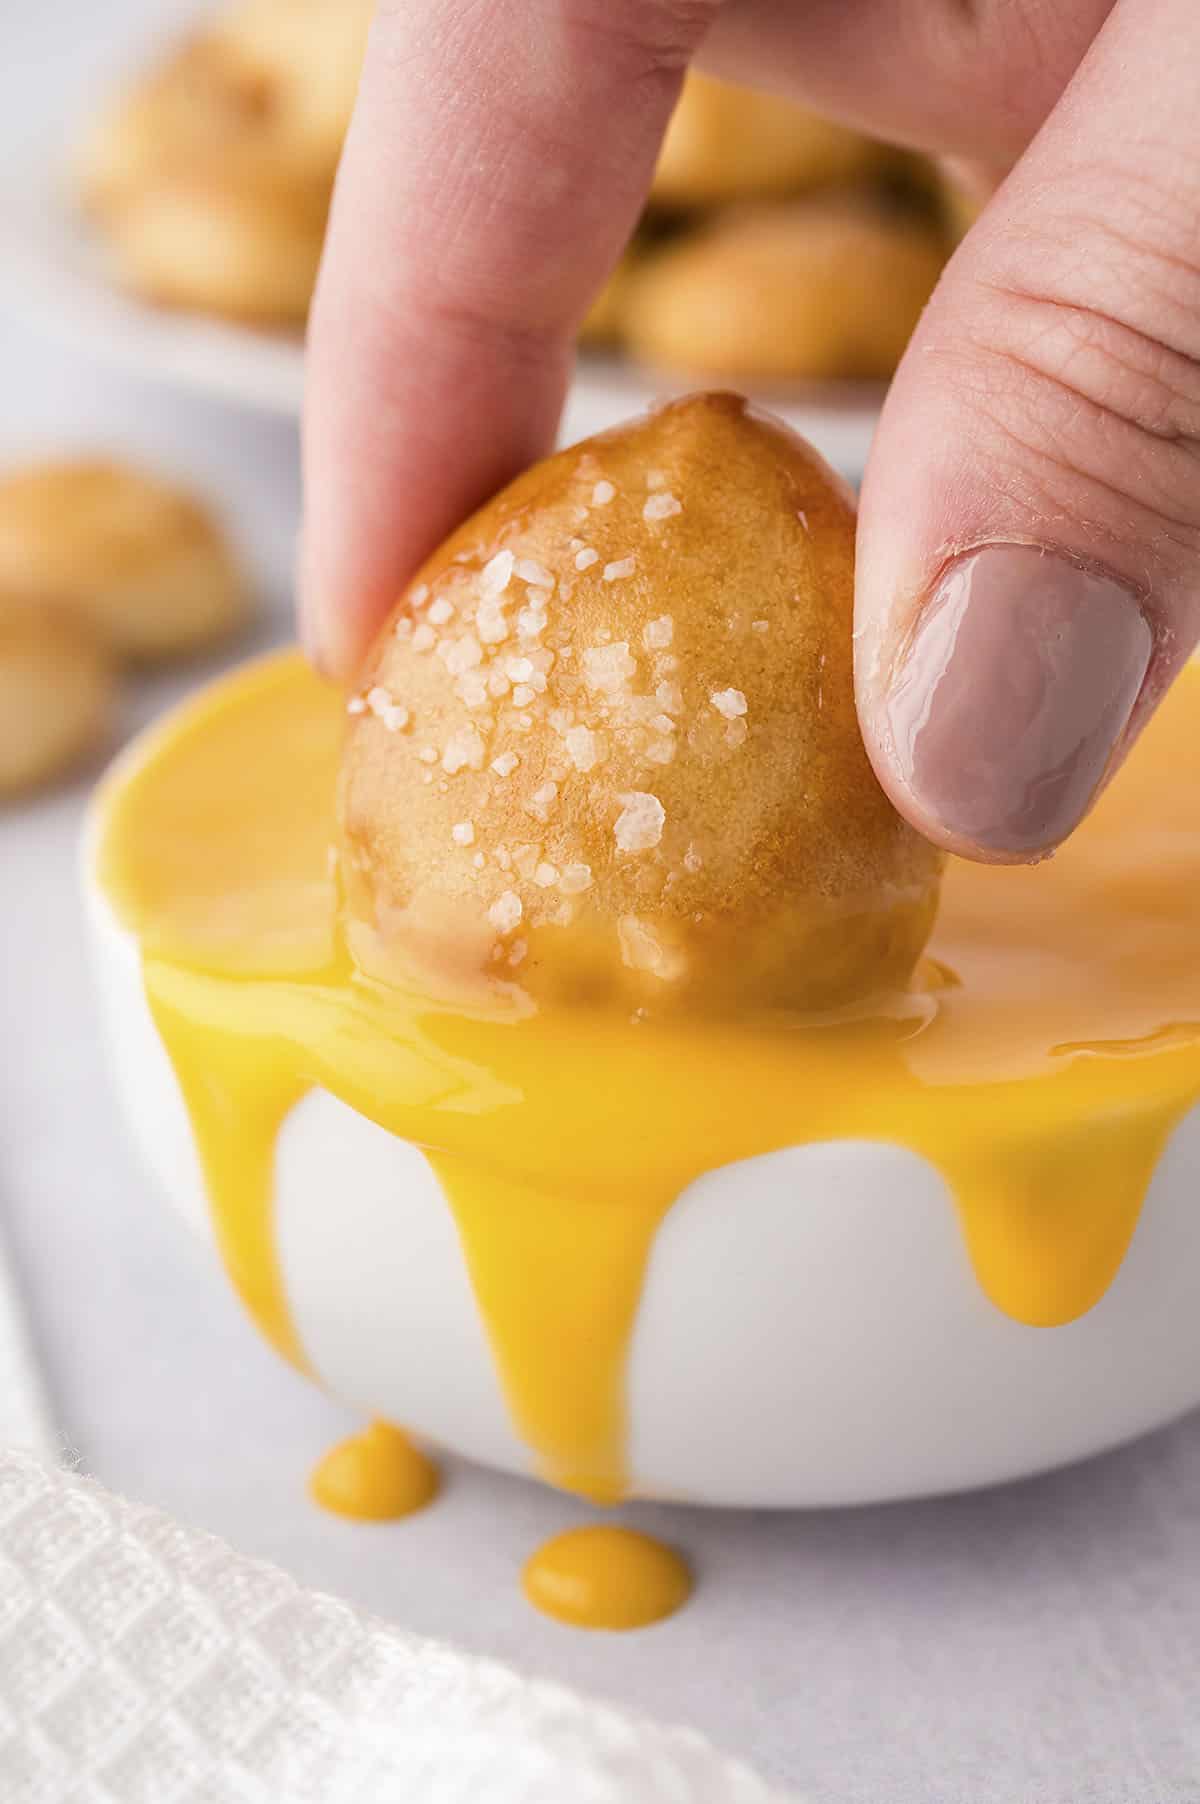 Pretzel bite being dunked into cheese dip.